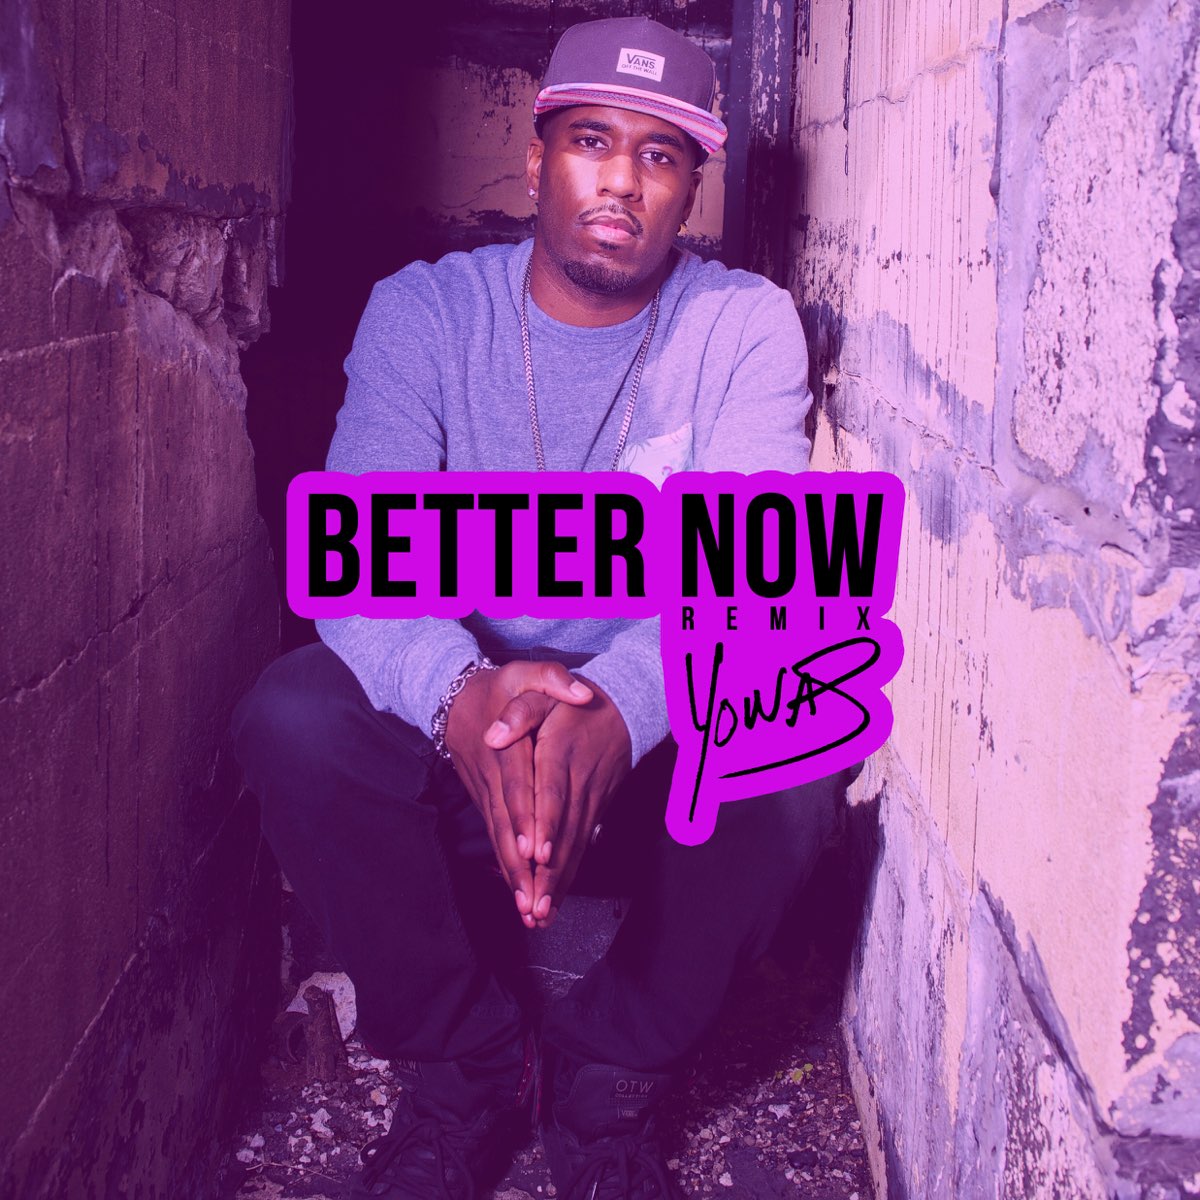 He to music now. Better Now. Better by Now. Музыка photo Yonas. You better Now.